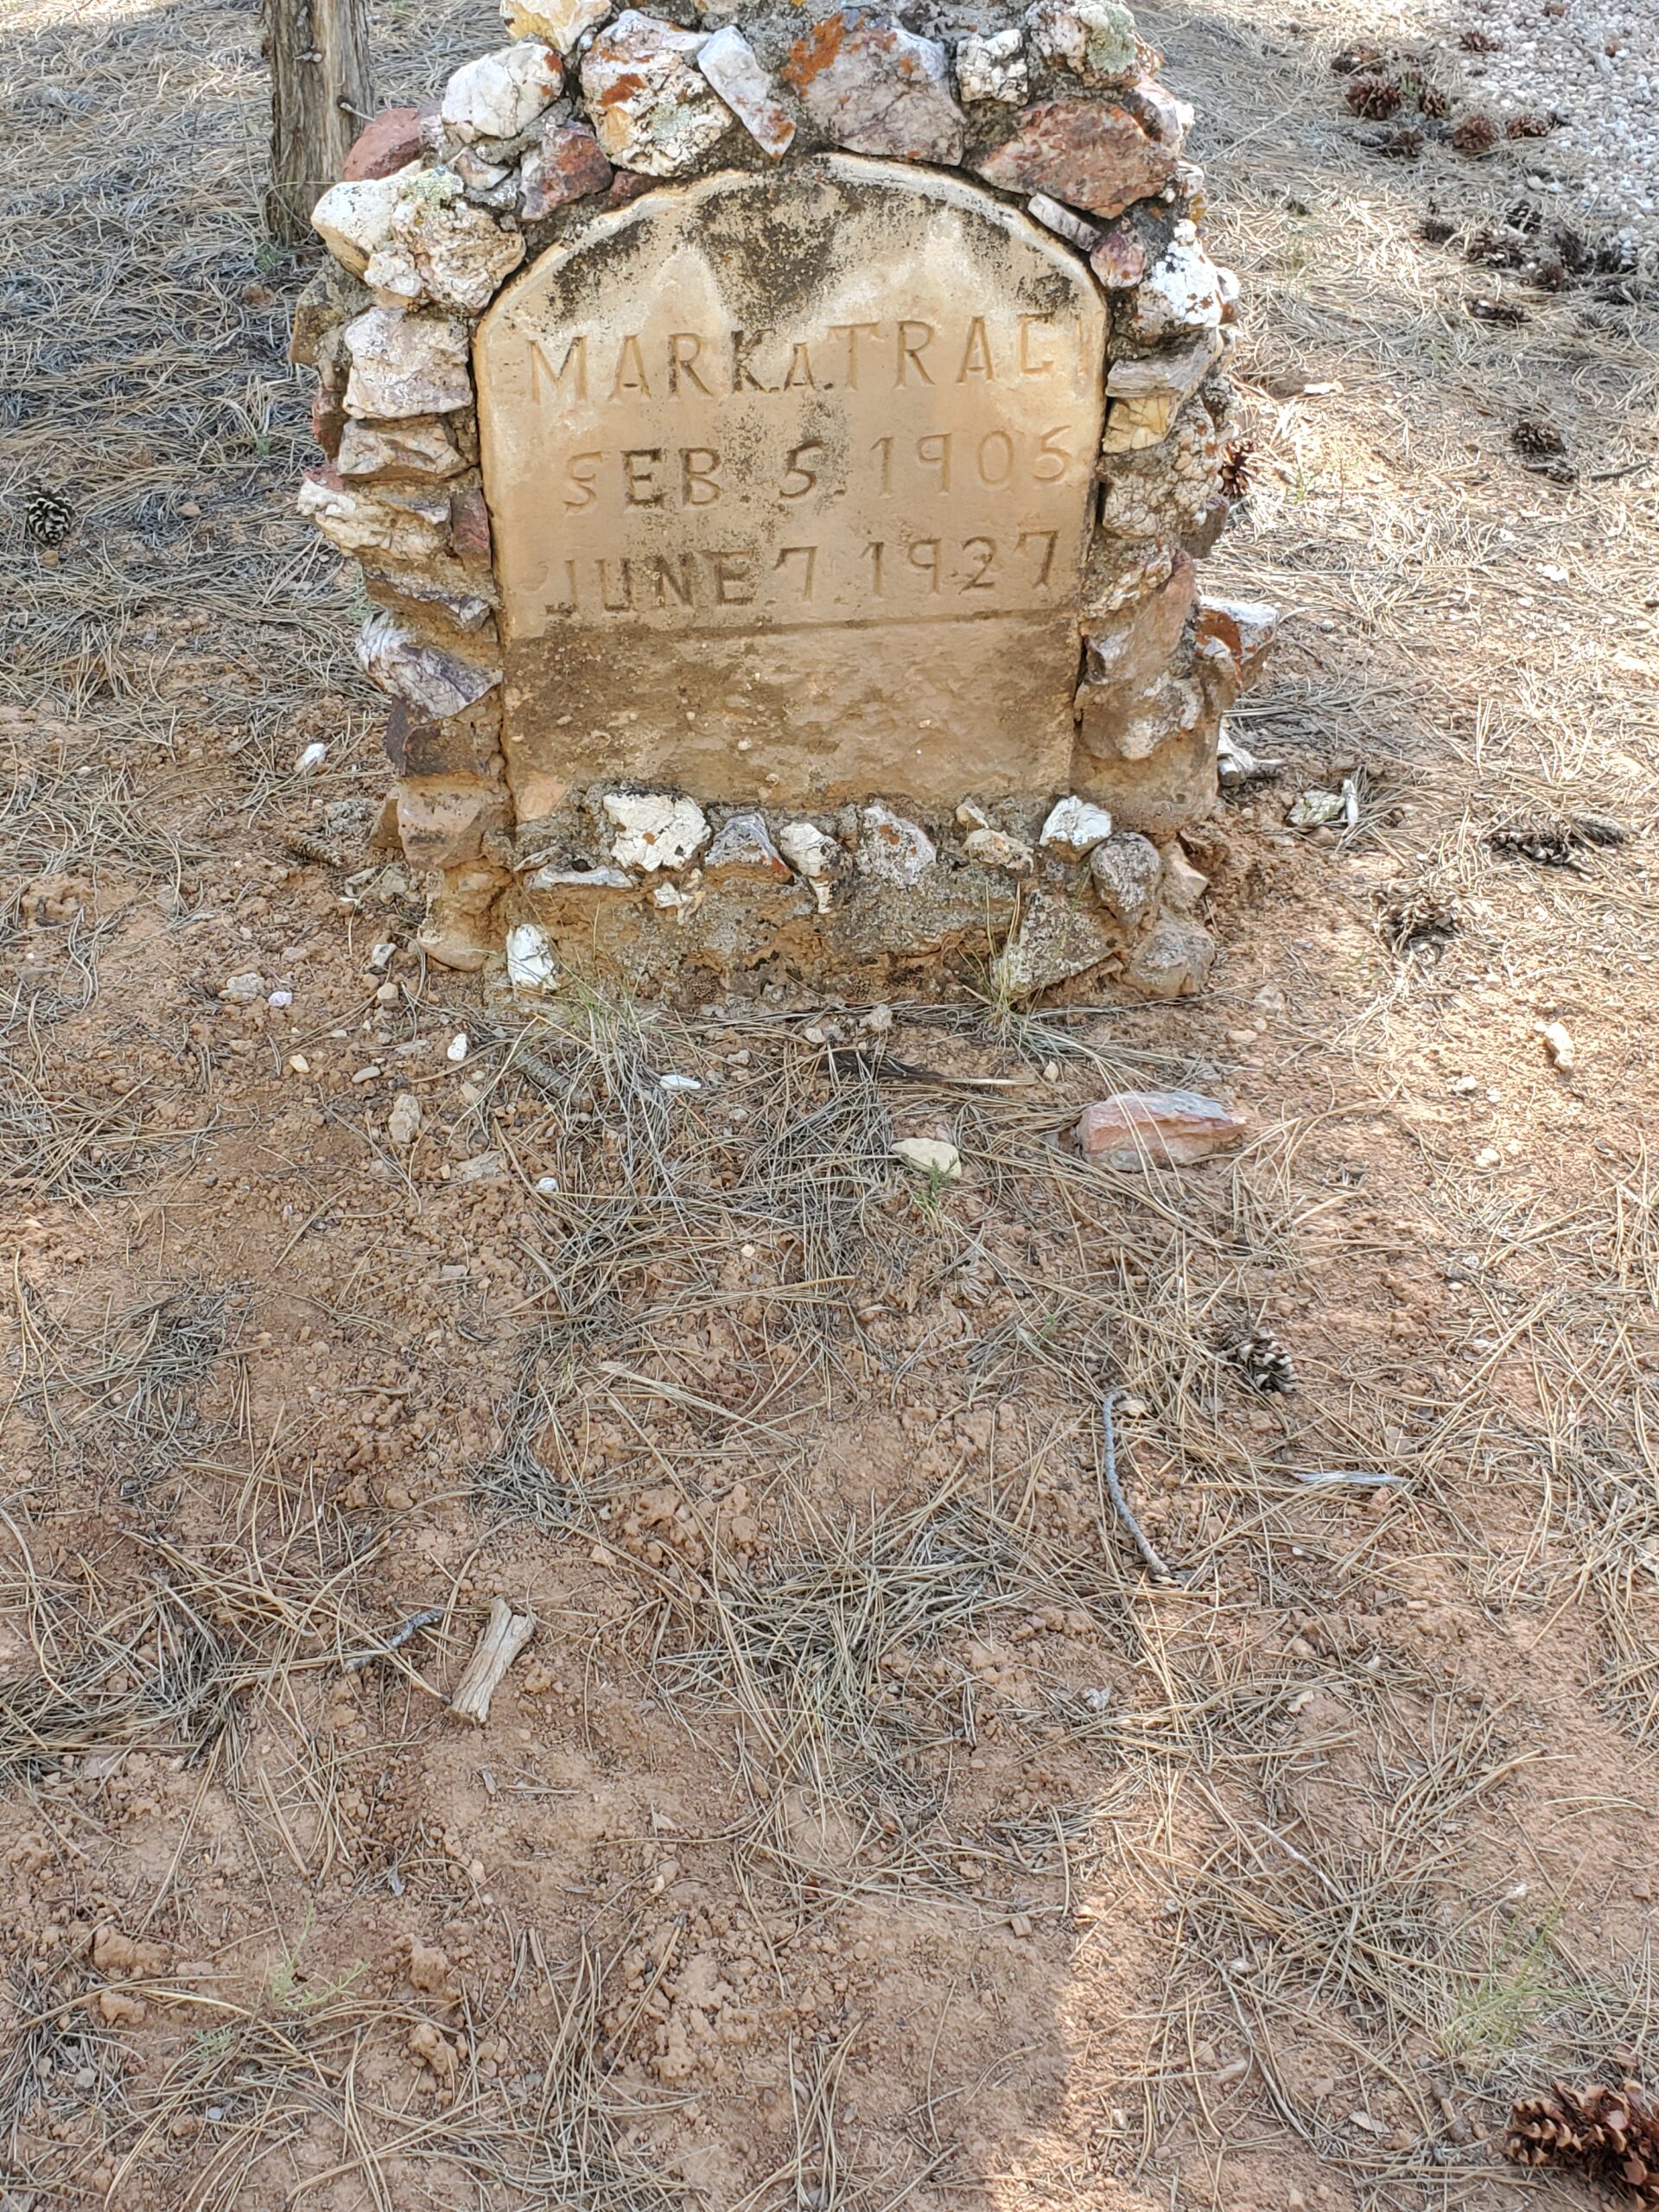 This headstone dates from 1927